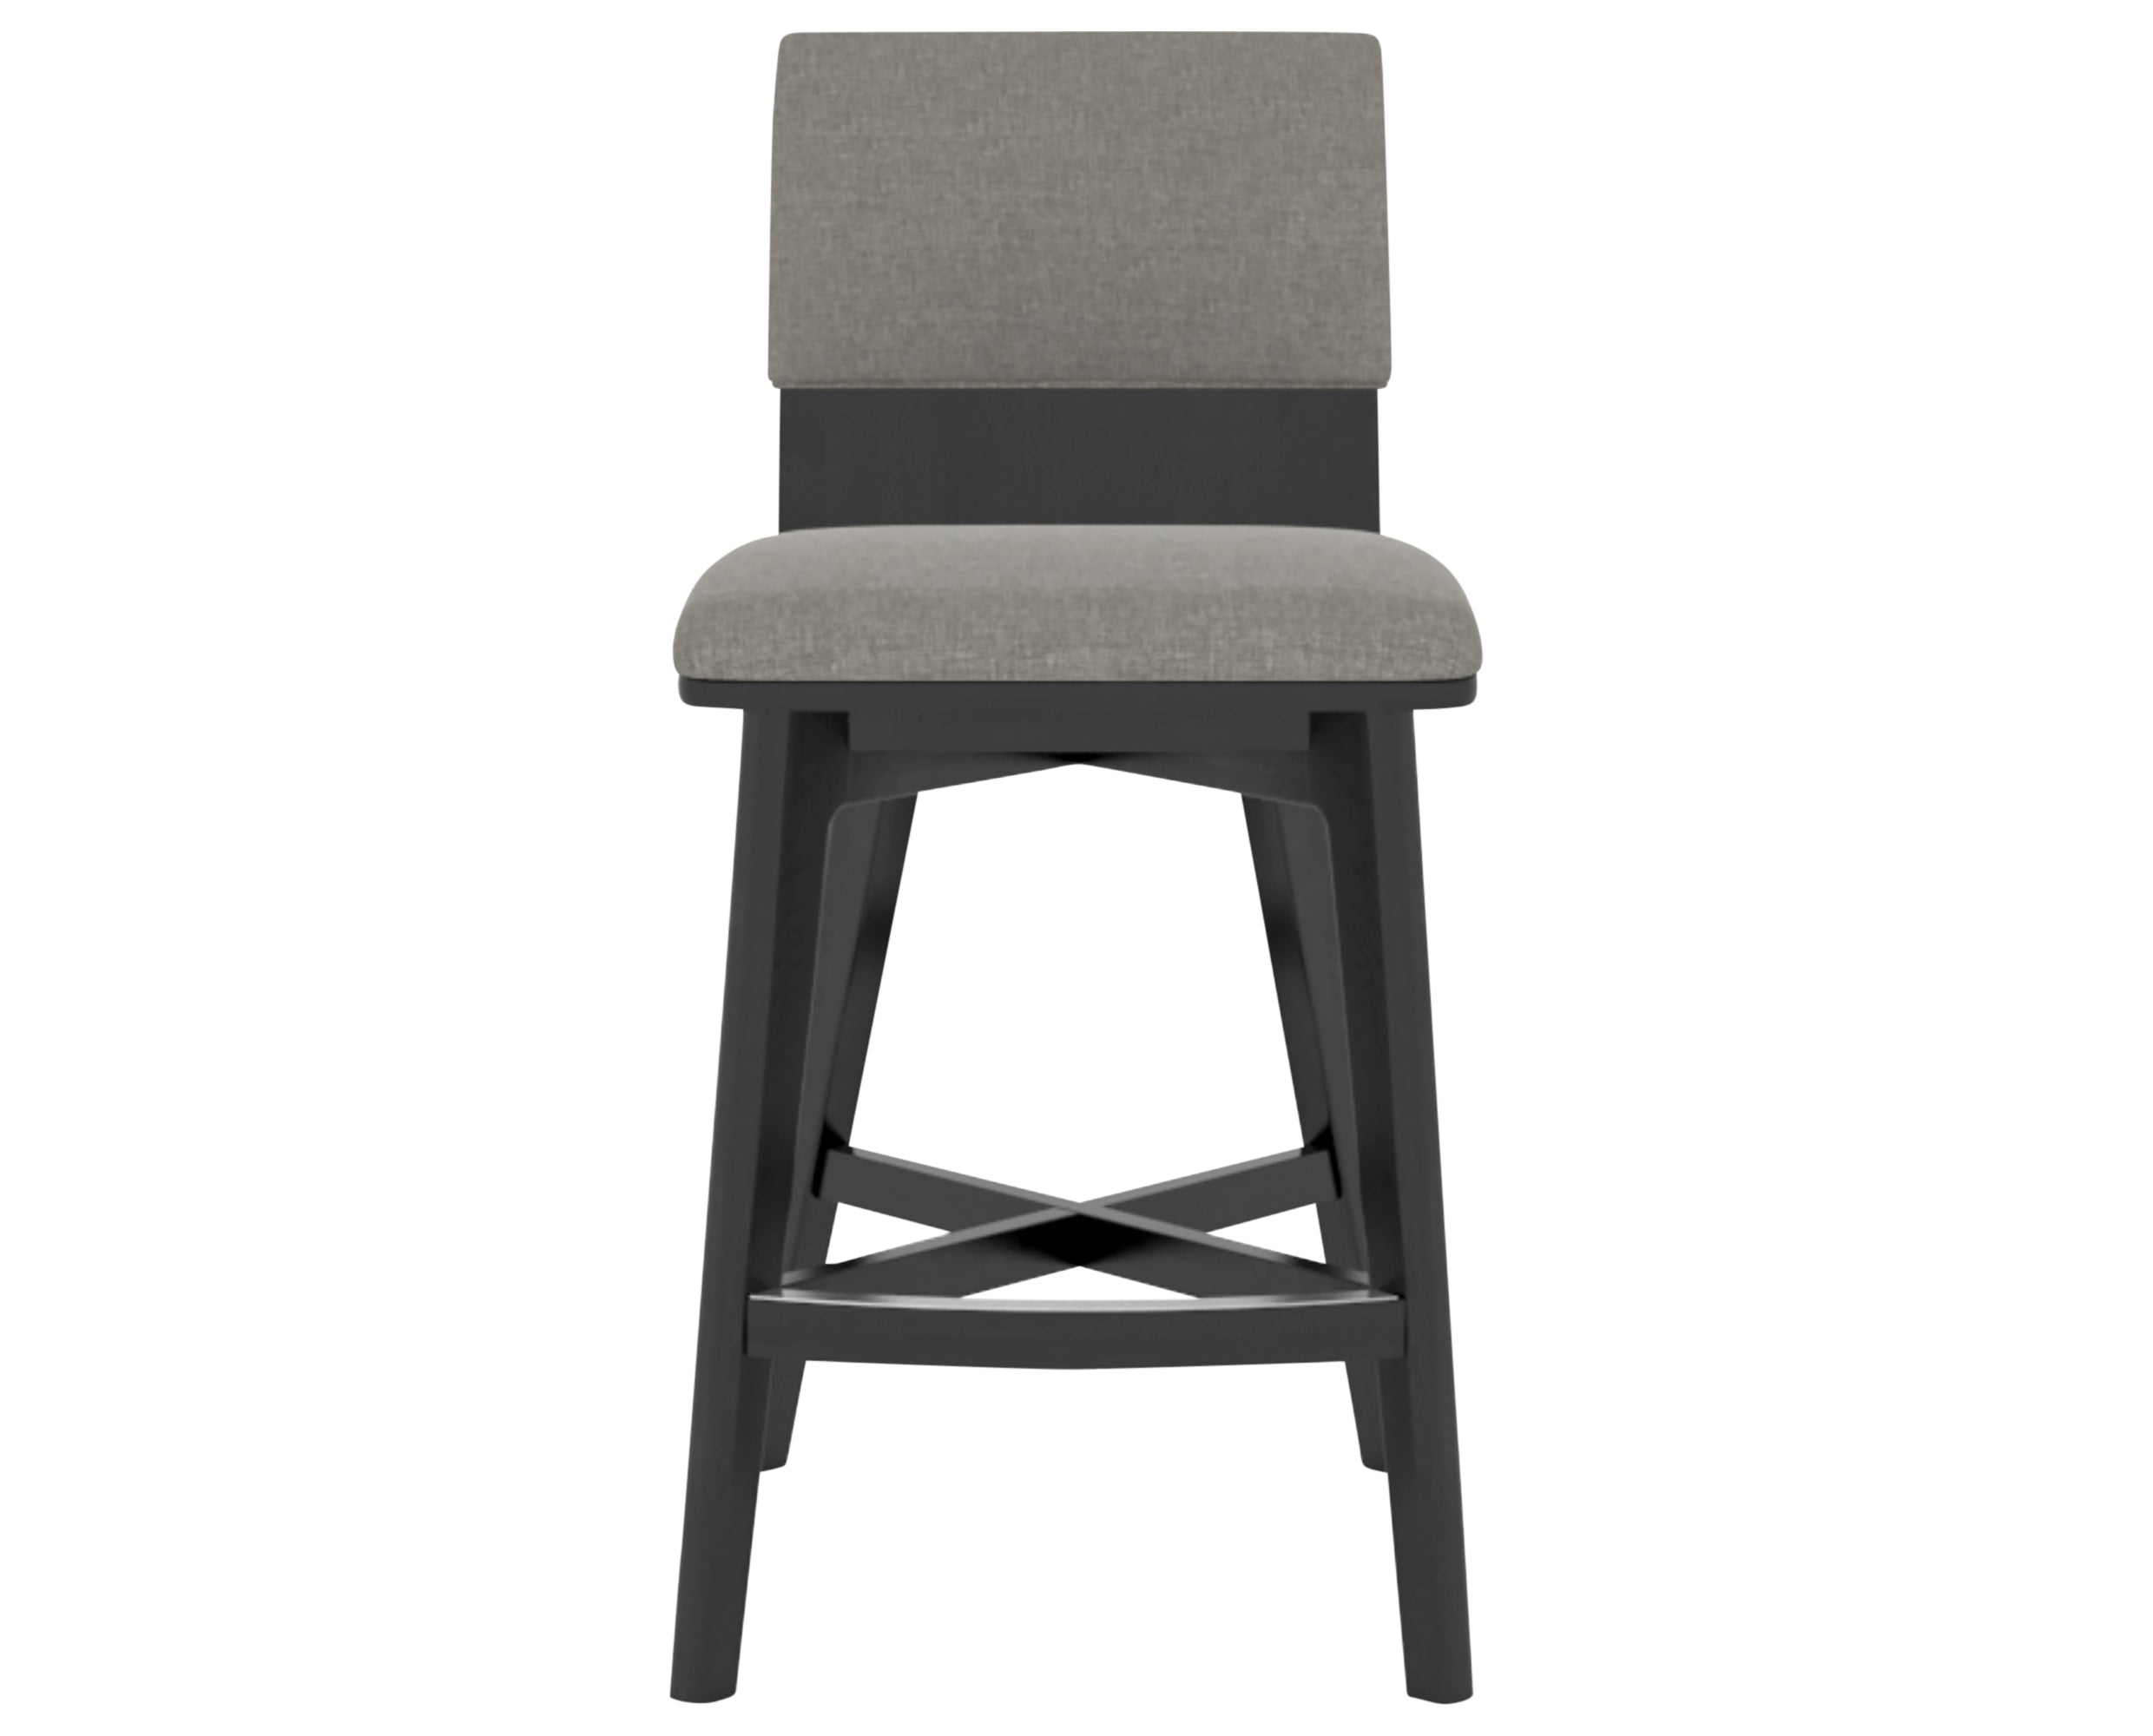 Counter Height | Canadel Downtown Counter Stool 8142 | Valley Ridge Furniture